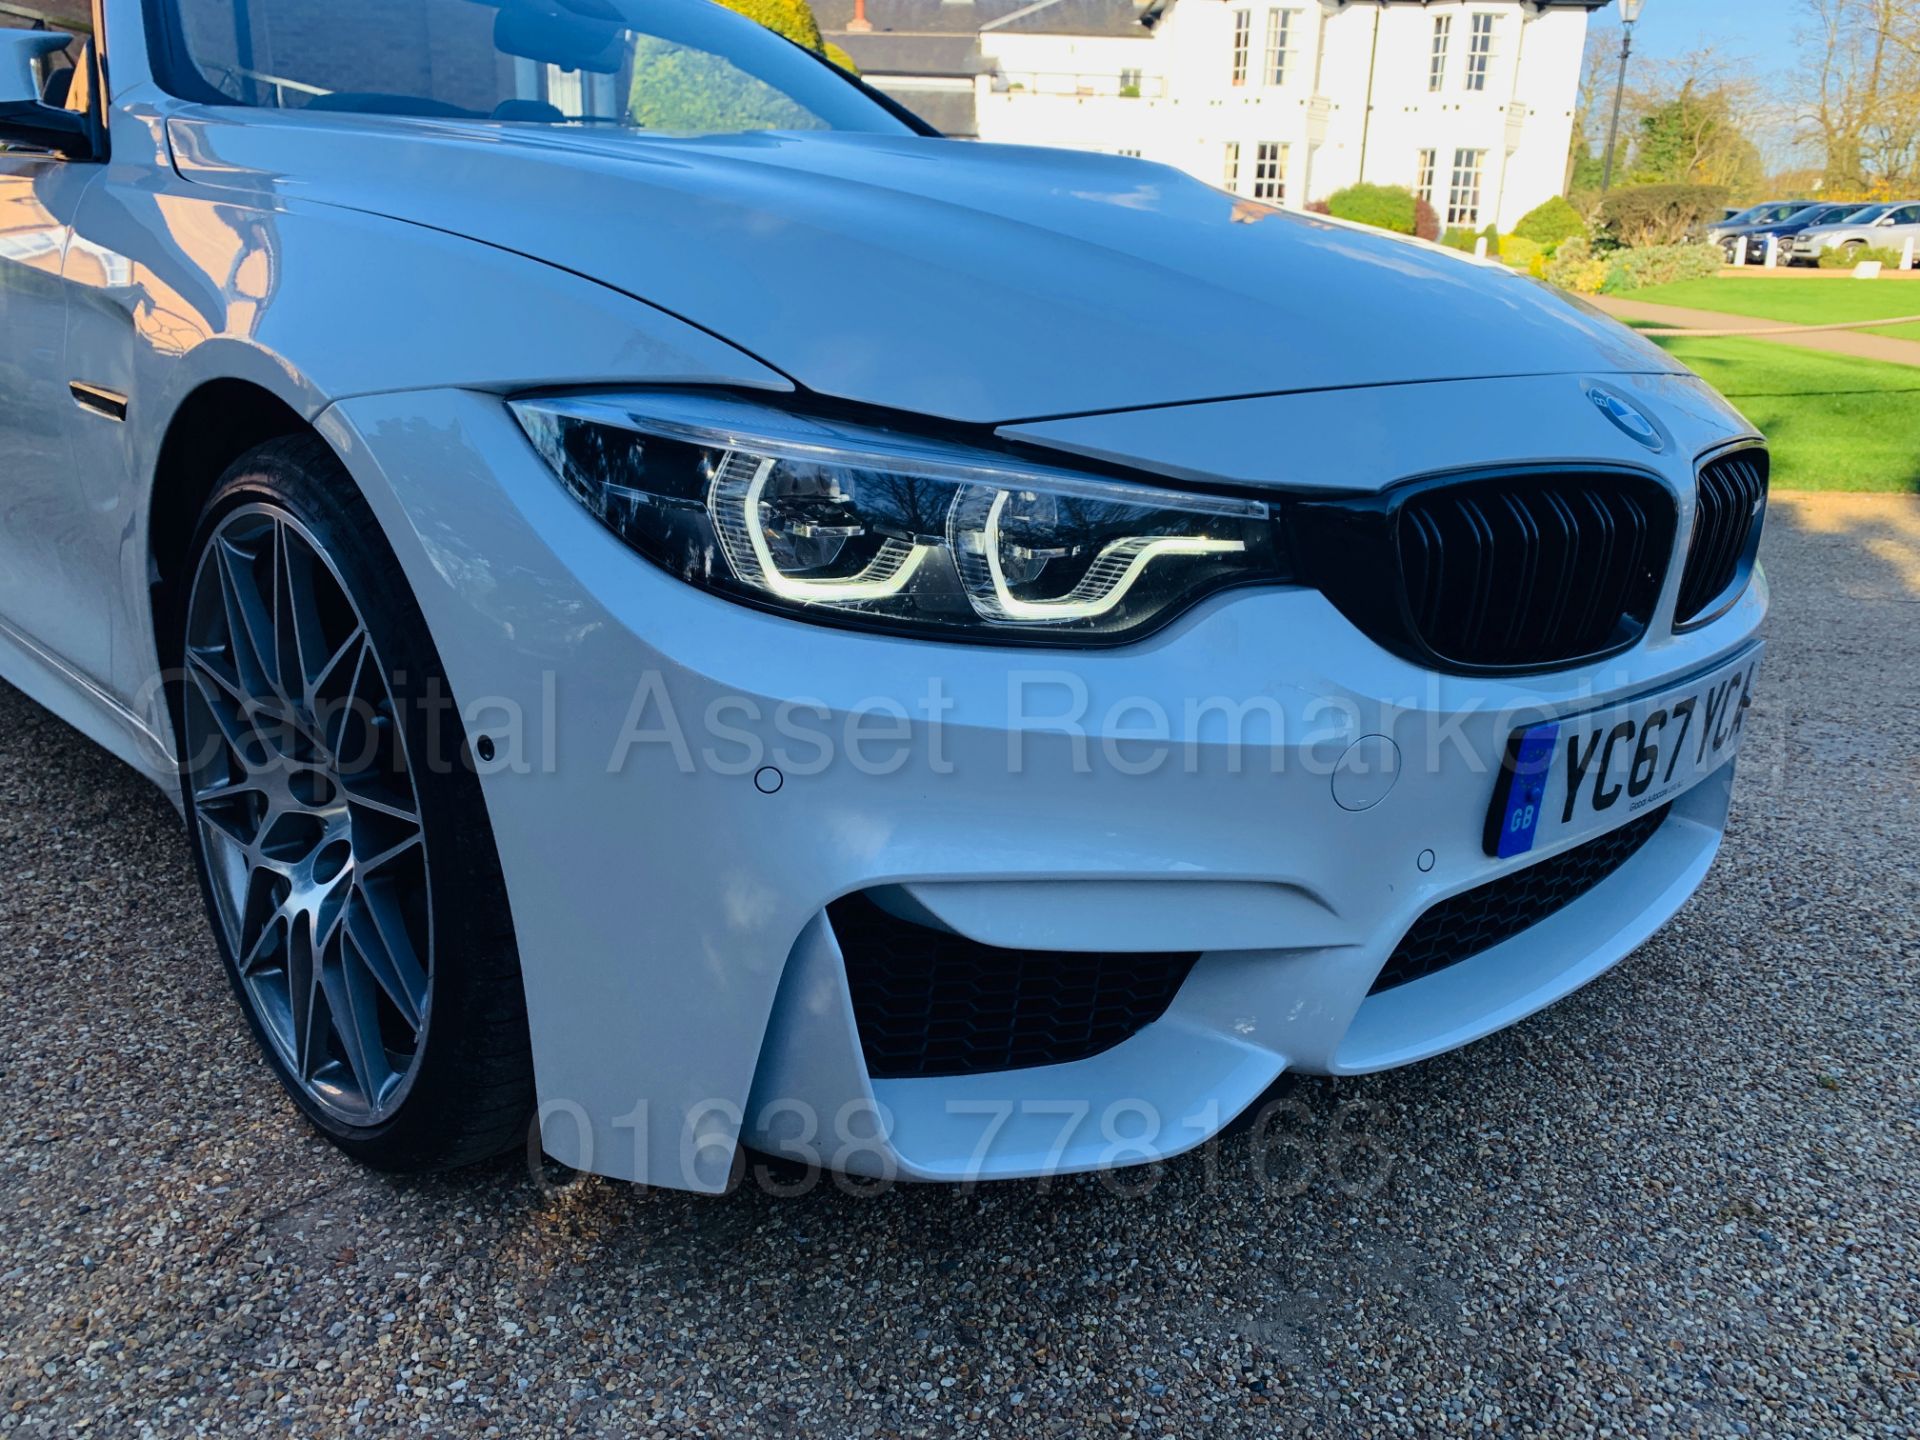 ON SALE BMW M4 CONVERTIBLE *COMPETITION PACKAGE* (2018 MODEL) '431 BHP - M DCT AUTO' WOW!!!!! - Image 25 of 89